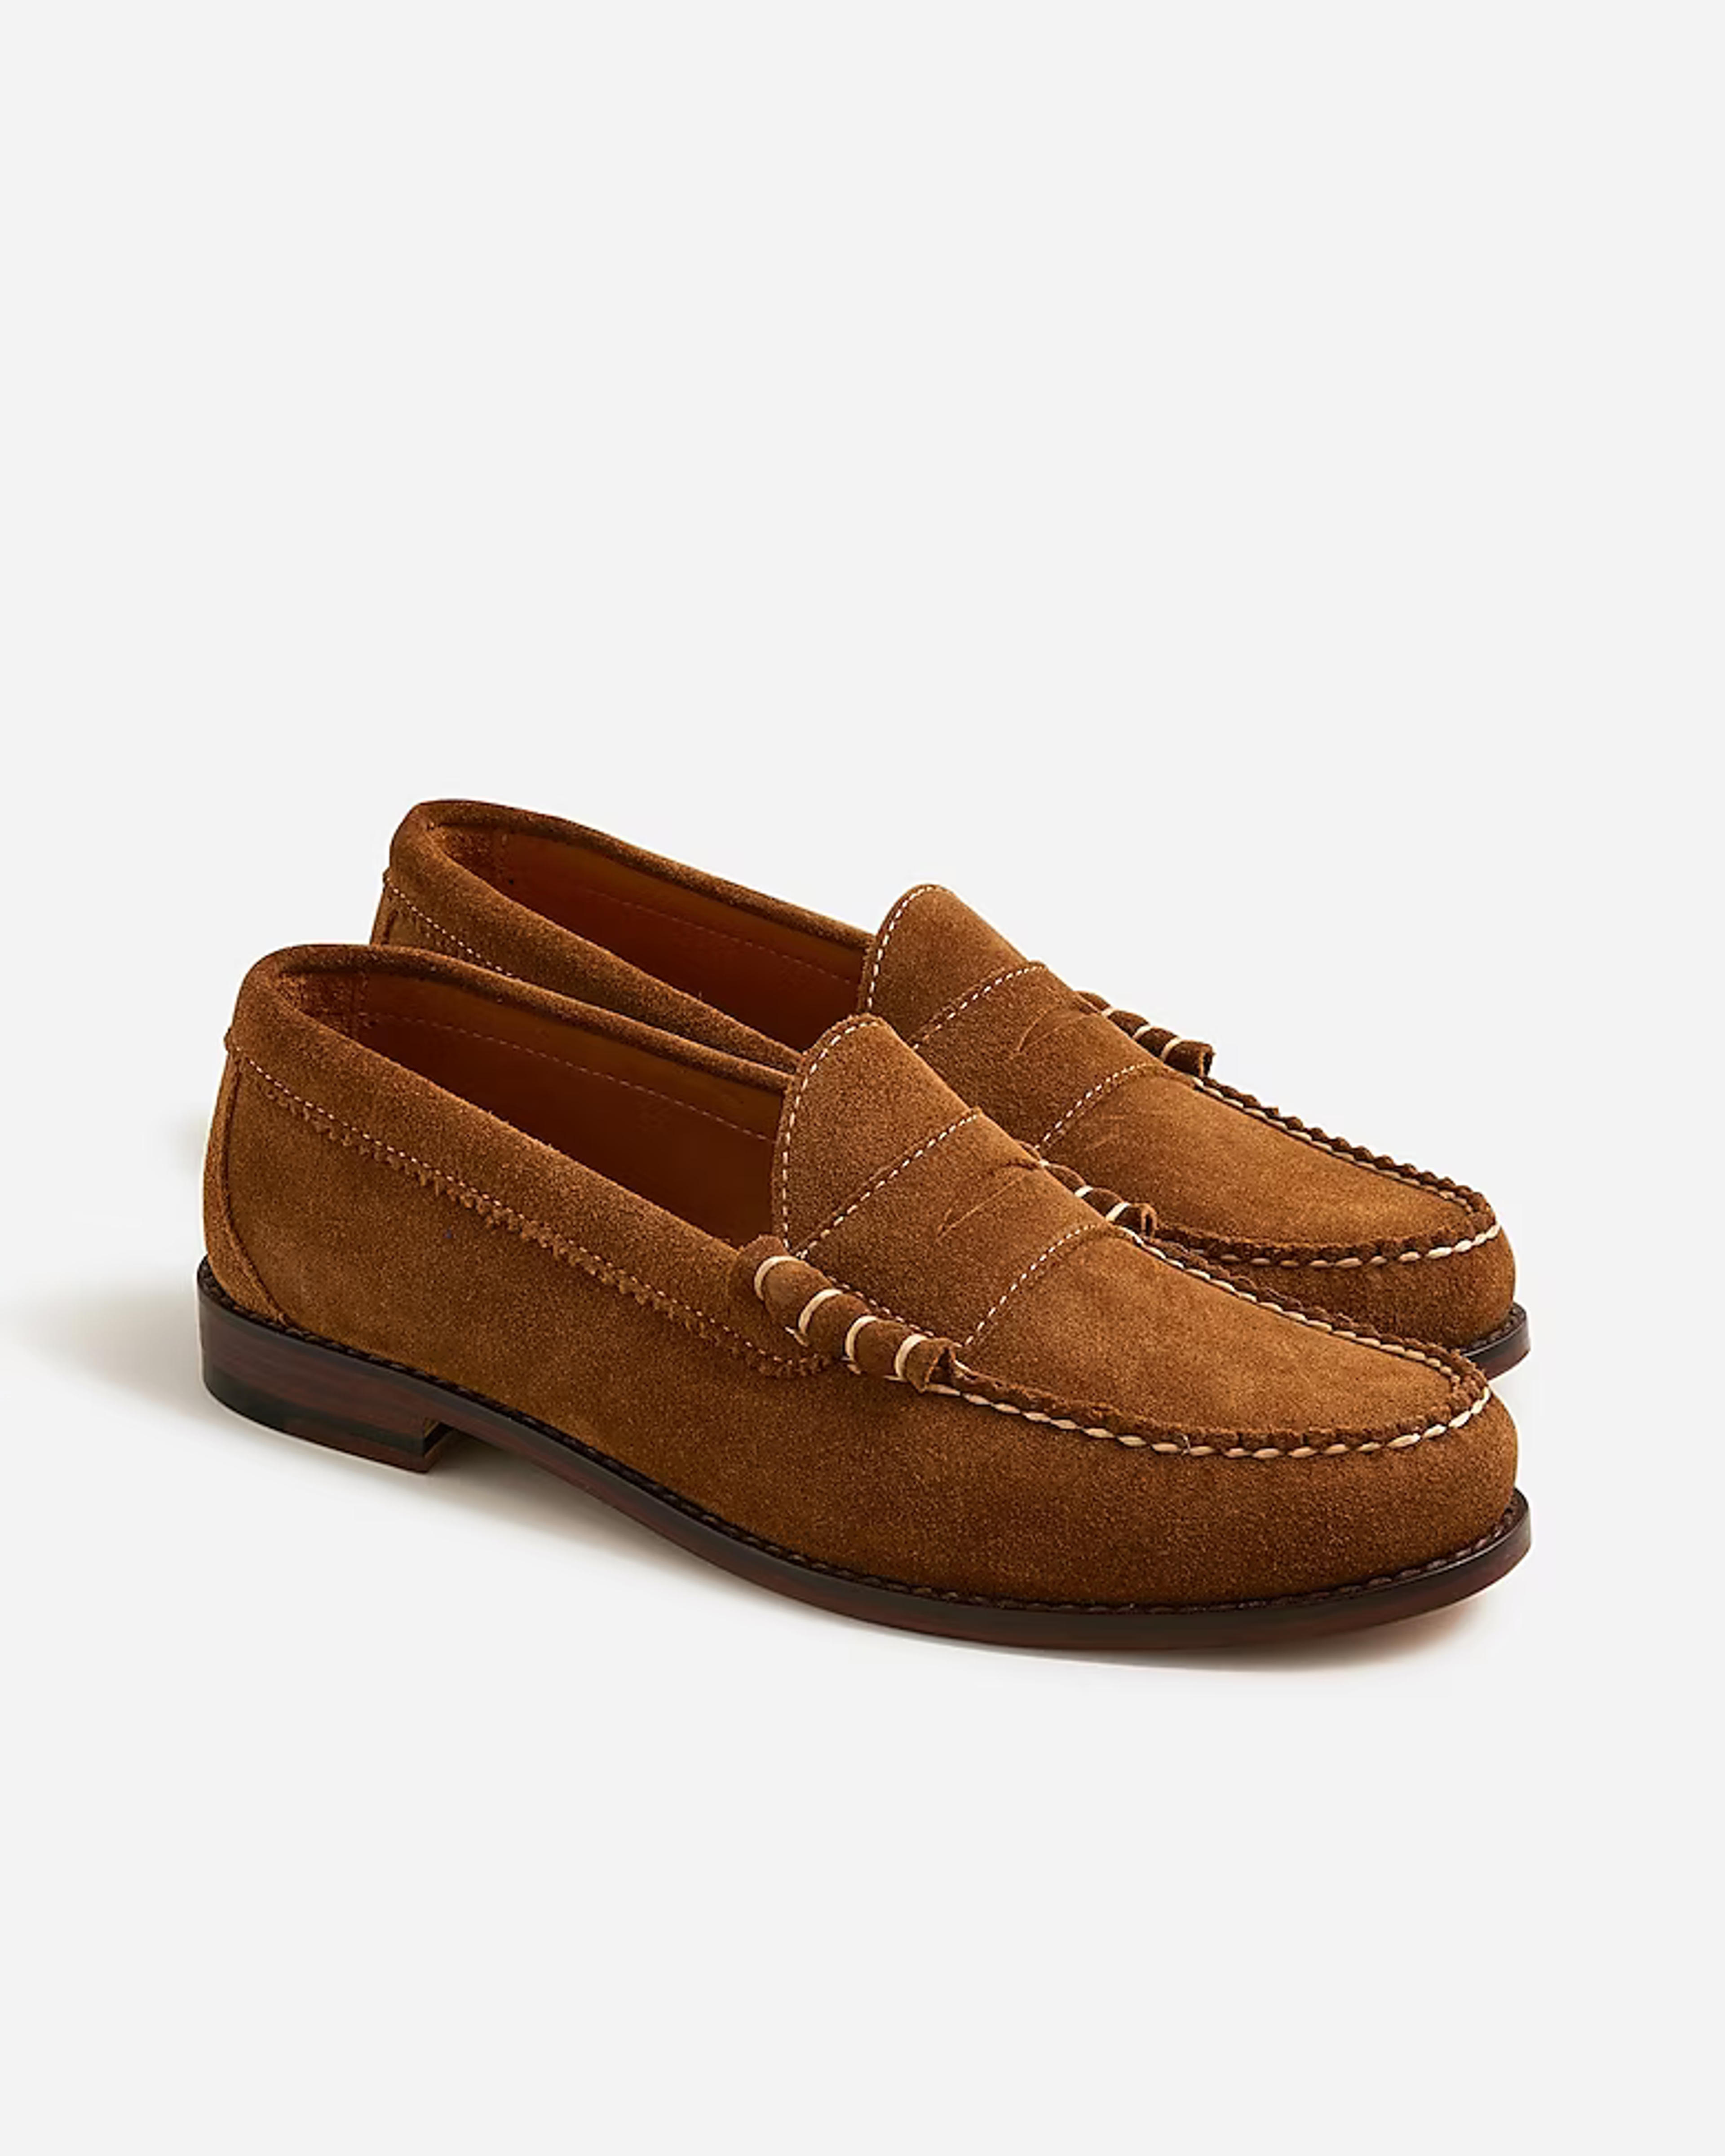 J.Crew: Camden Suede Loafers With Leather Soles For Men